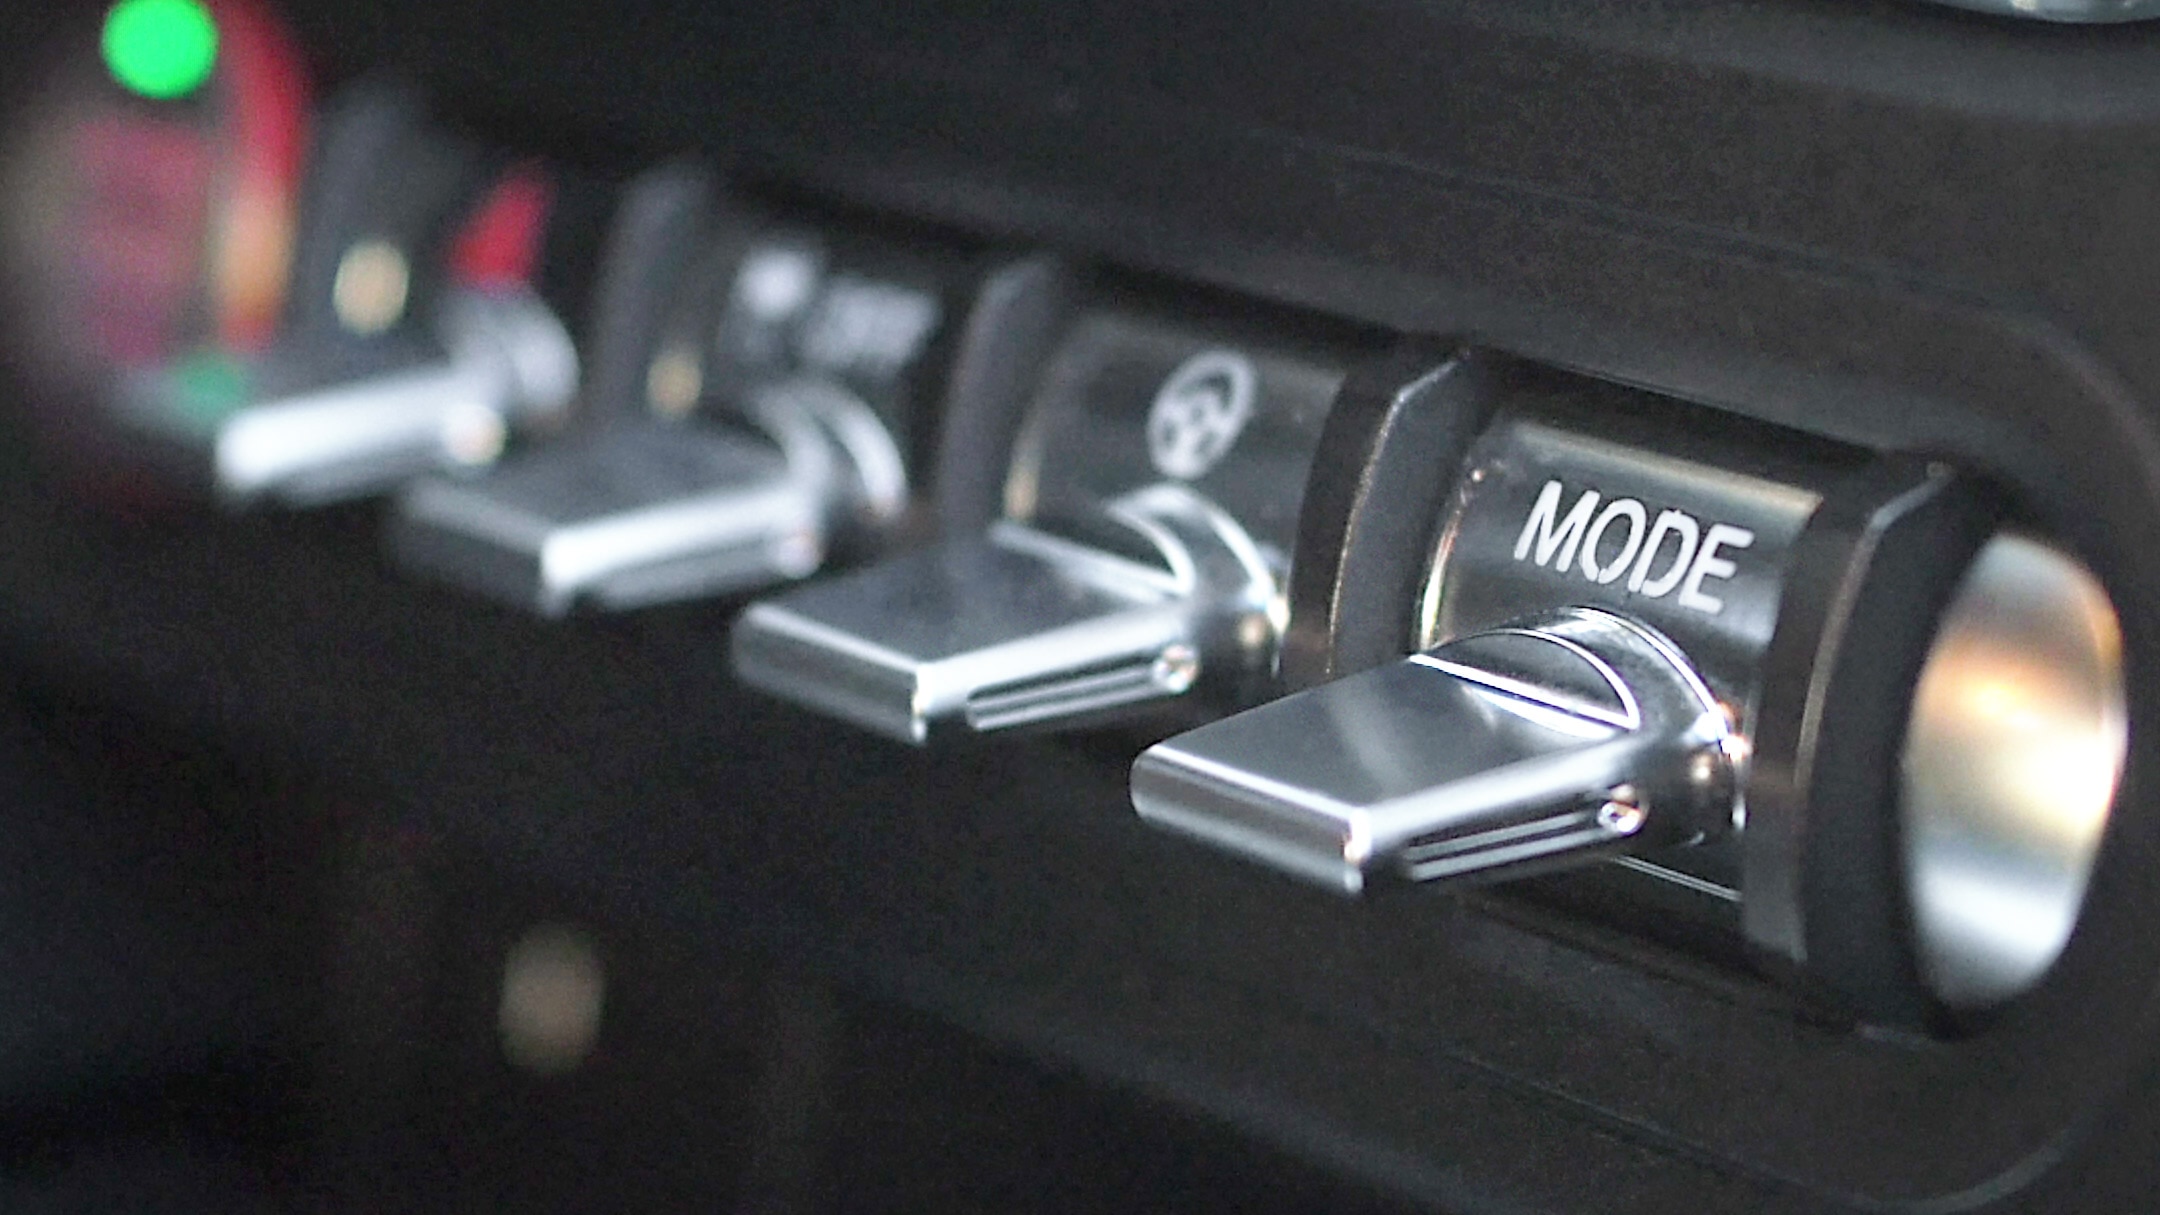 Ford Mustang My Mode switch close up